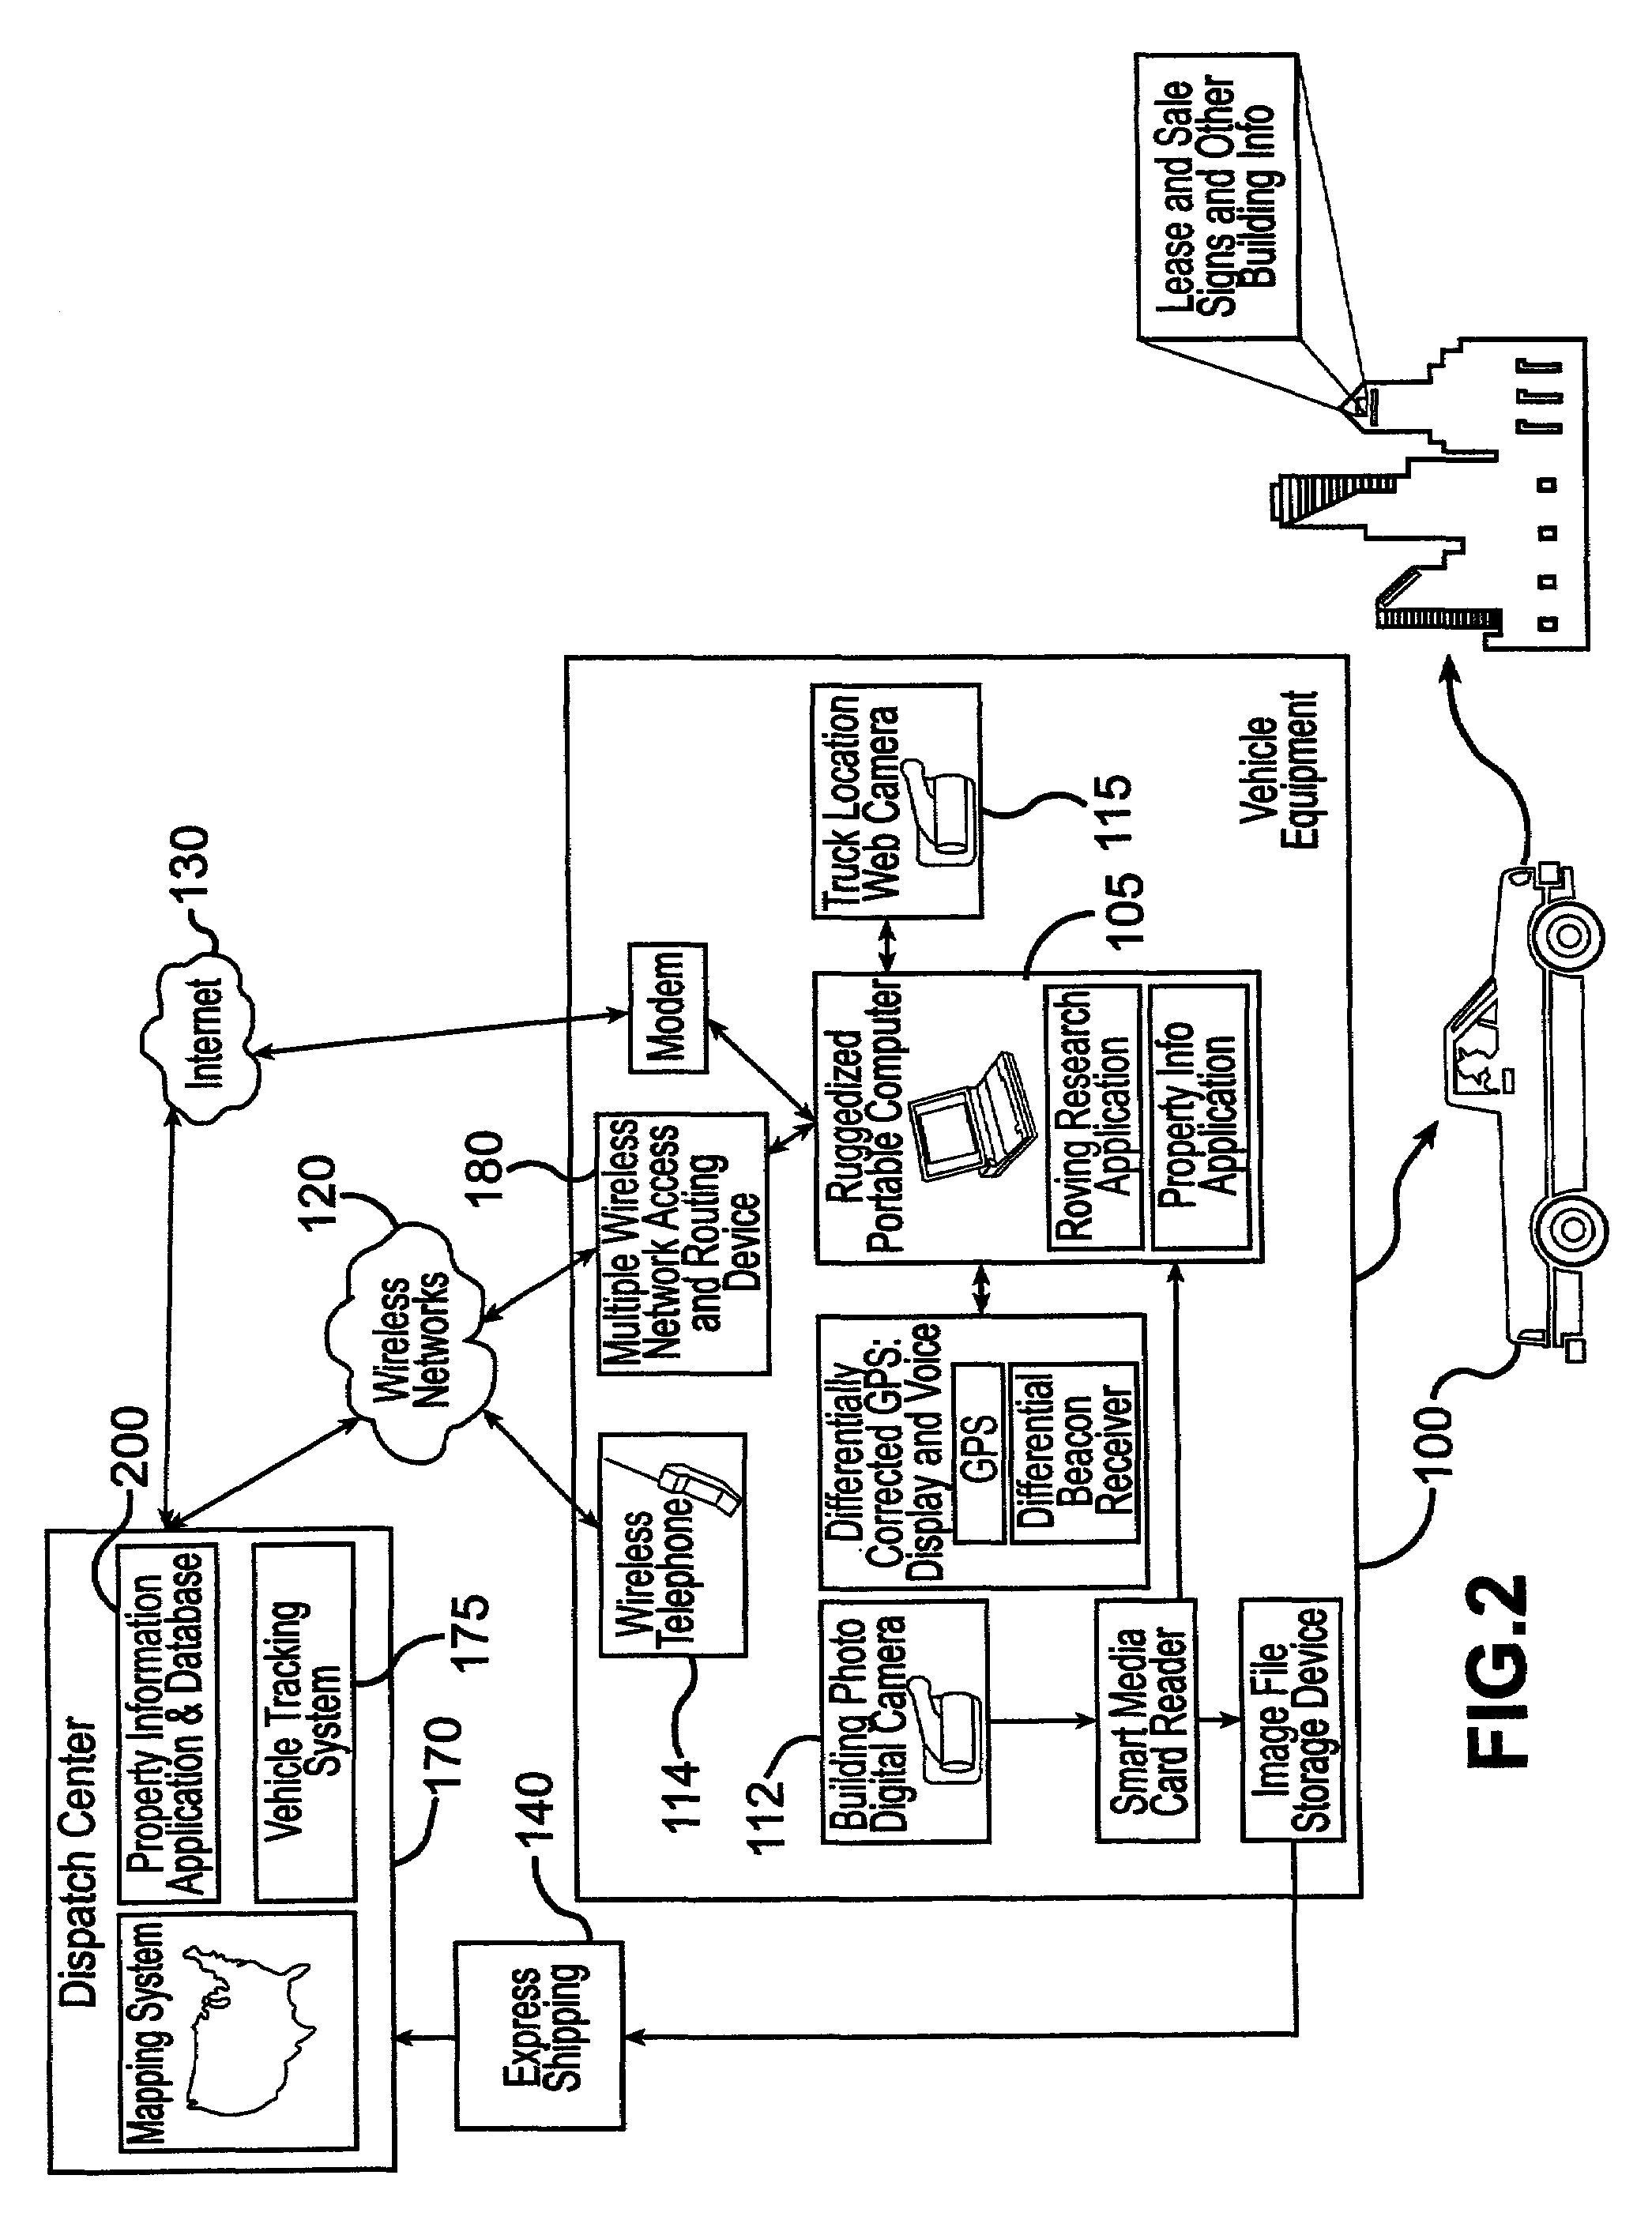 System and method for collection, distribution, and use of information in connection with commercial real estate